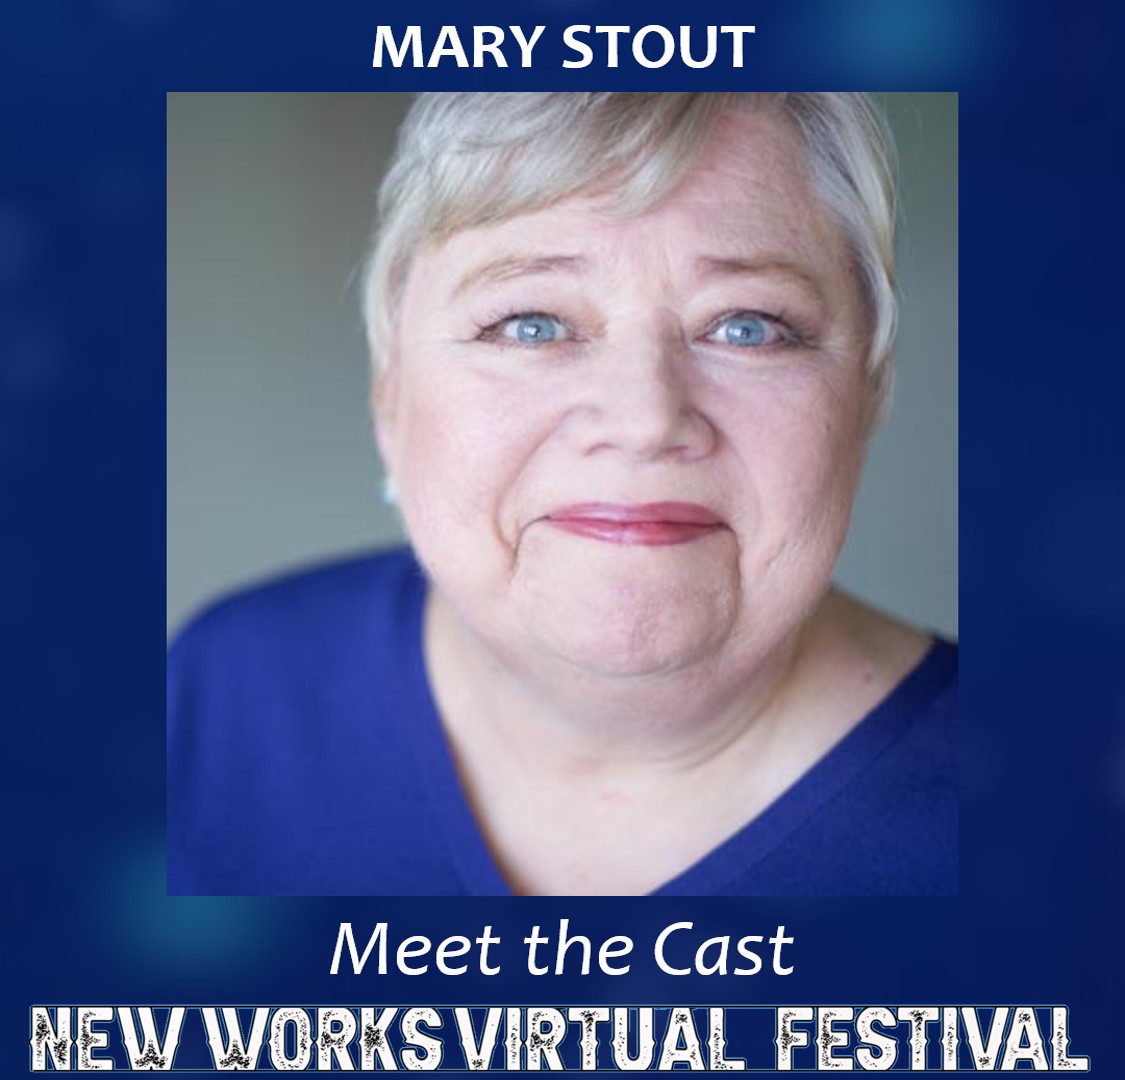 Meet Mary Stout from the cast of 'In the Gutter' by John Morogiello. Stay tuned to learn more about the team of performers and creatives bringing this star-studded festival to life. #nwvfest #newworksvirtualfestival #meethecast